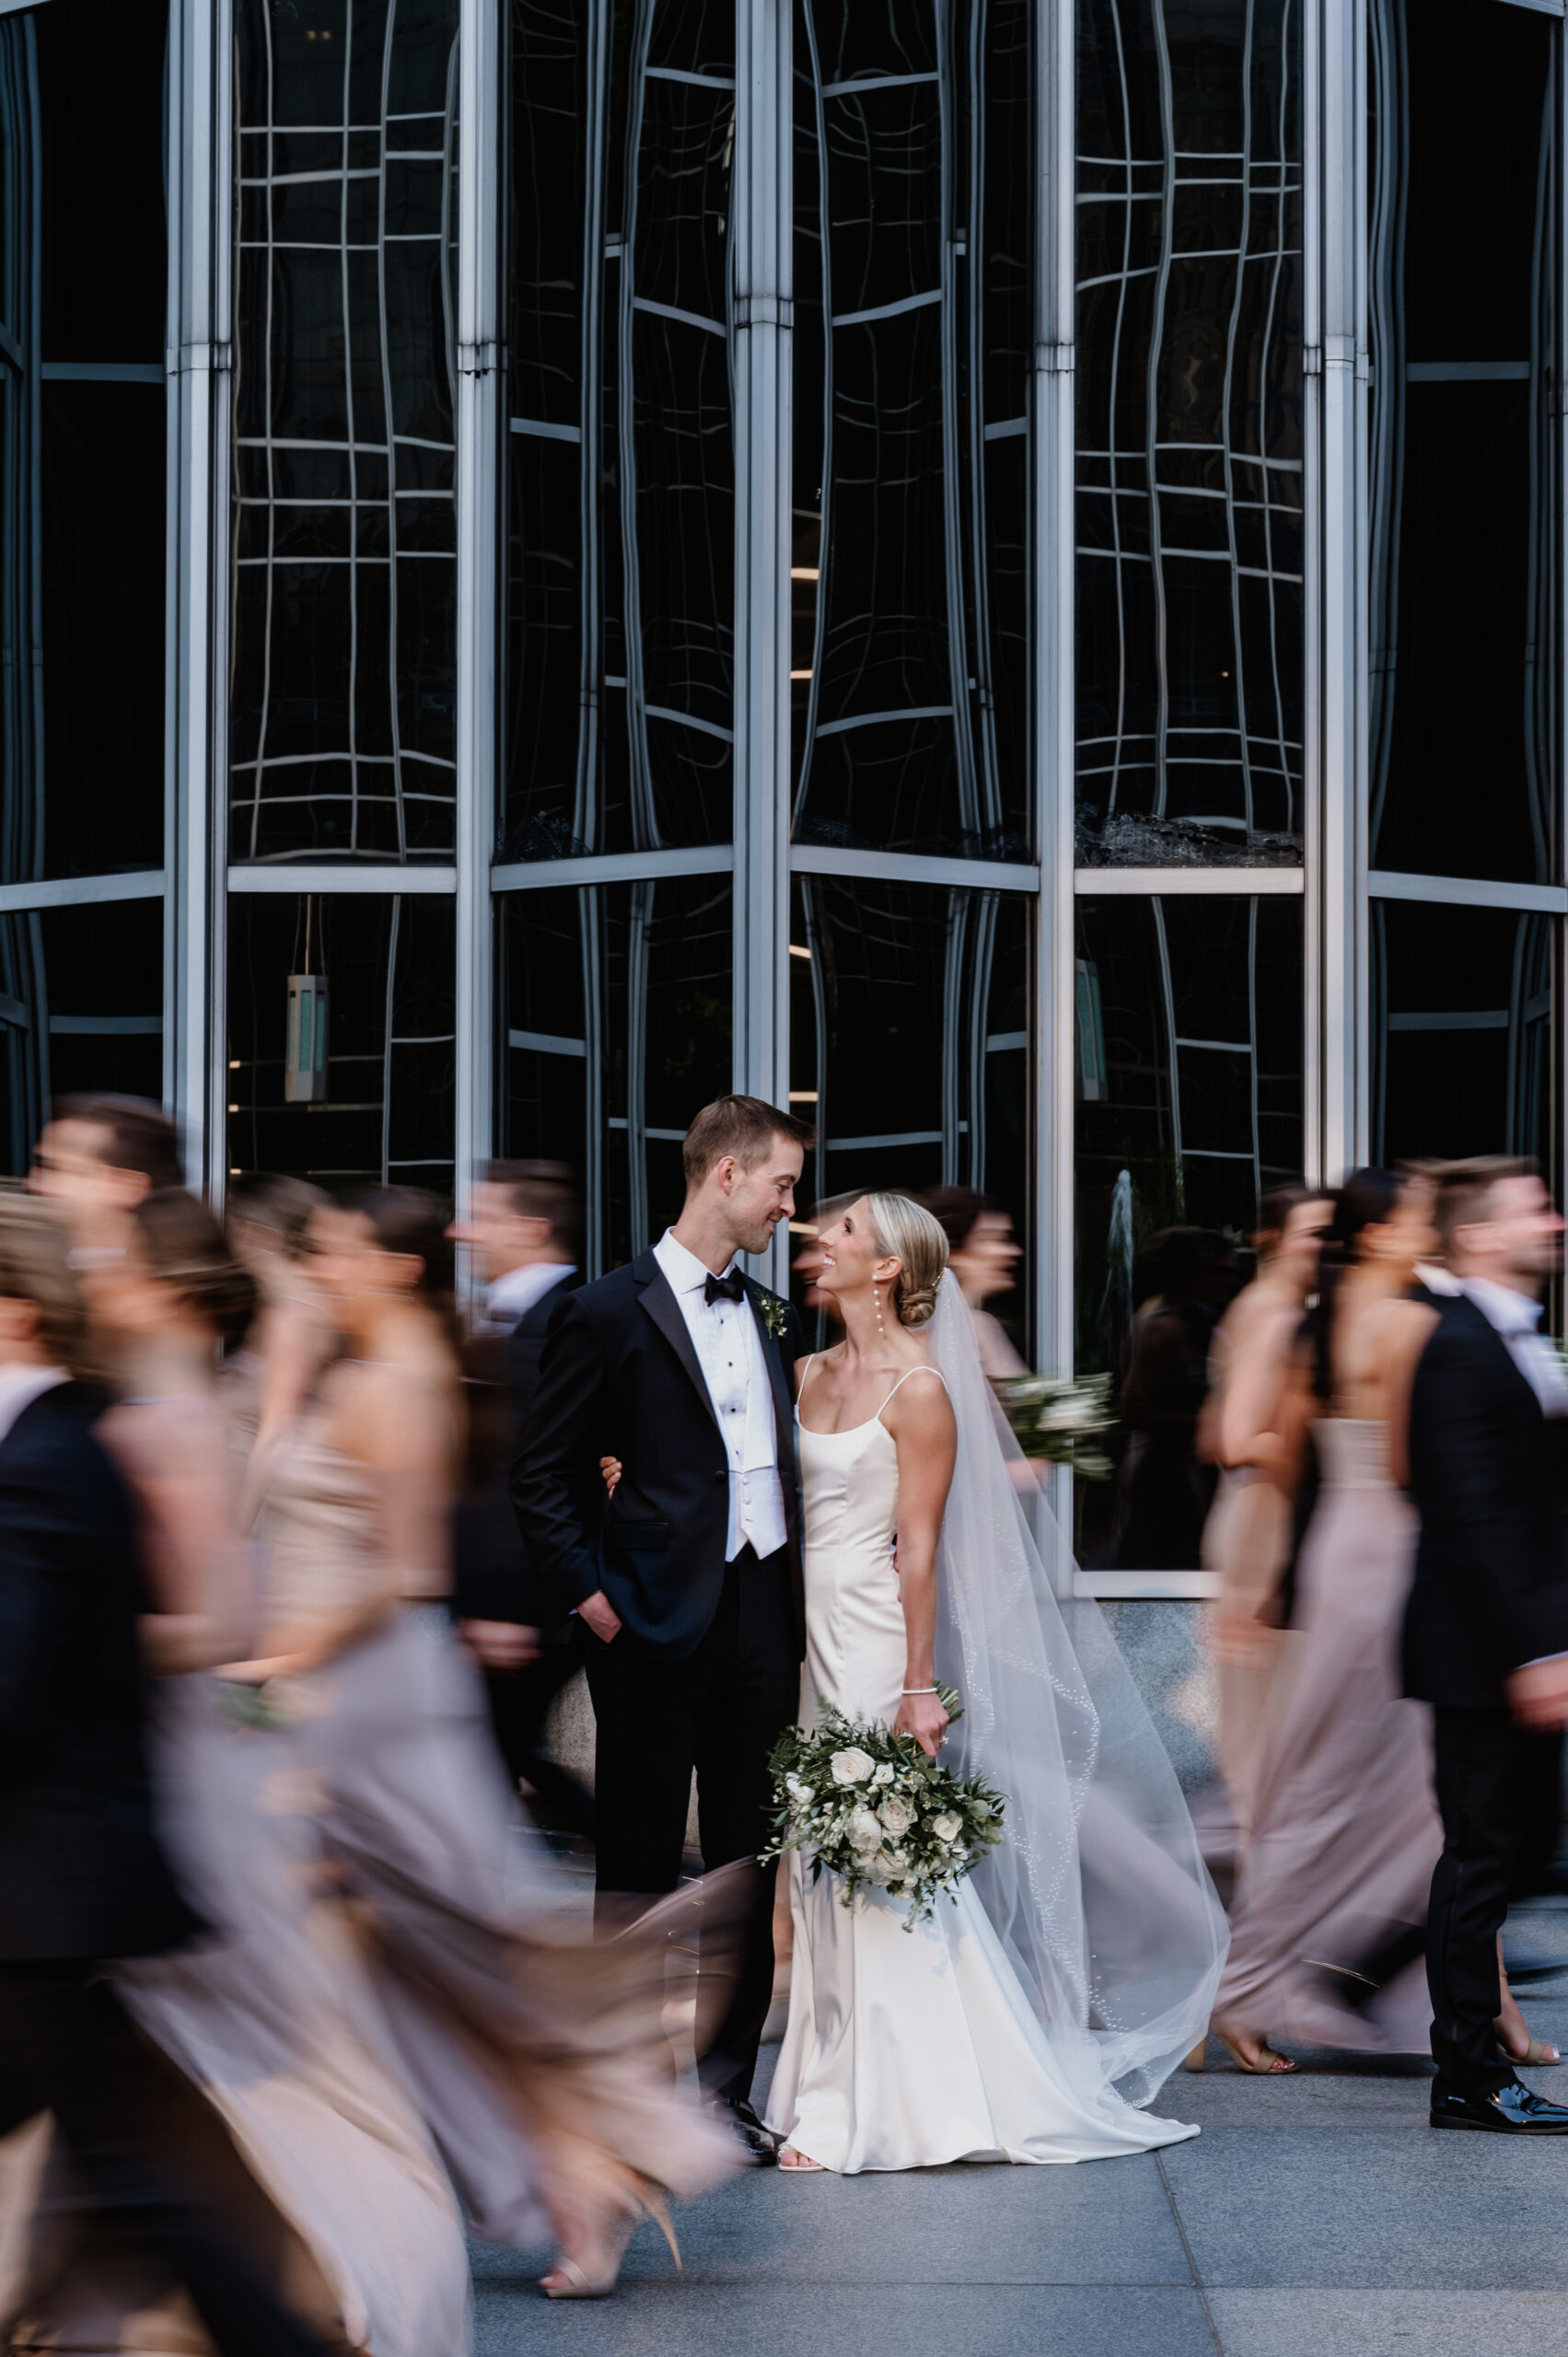 A photo of a bride and groom looking at each other at PPG Plaza. Their wedding party has motion blur surrounding them.